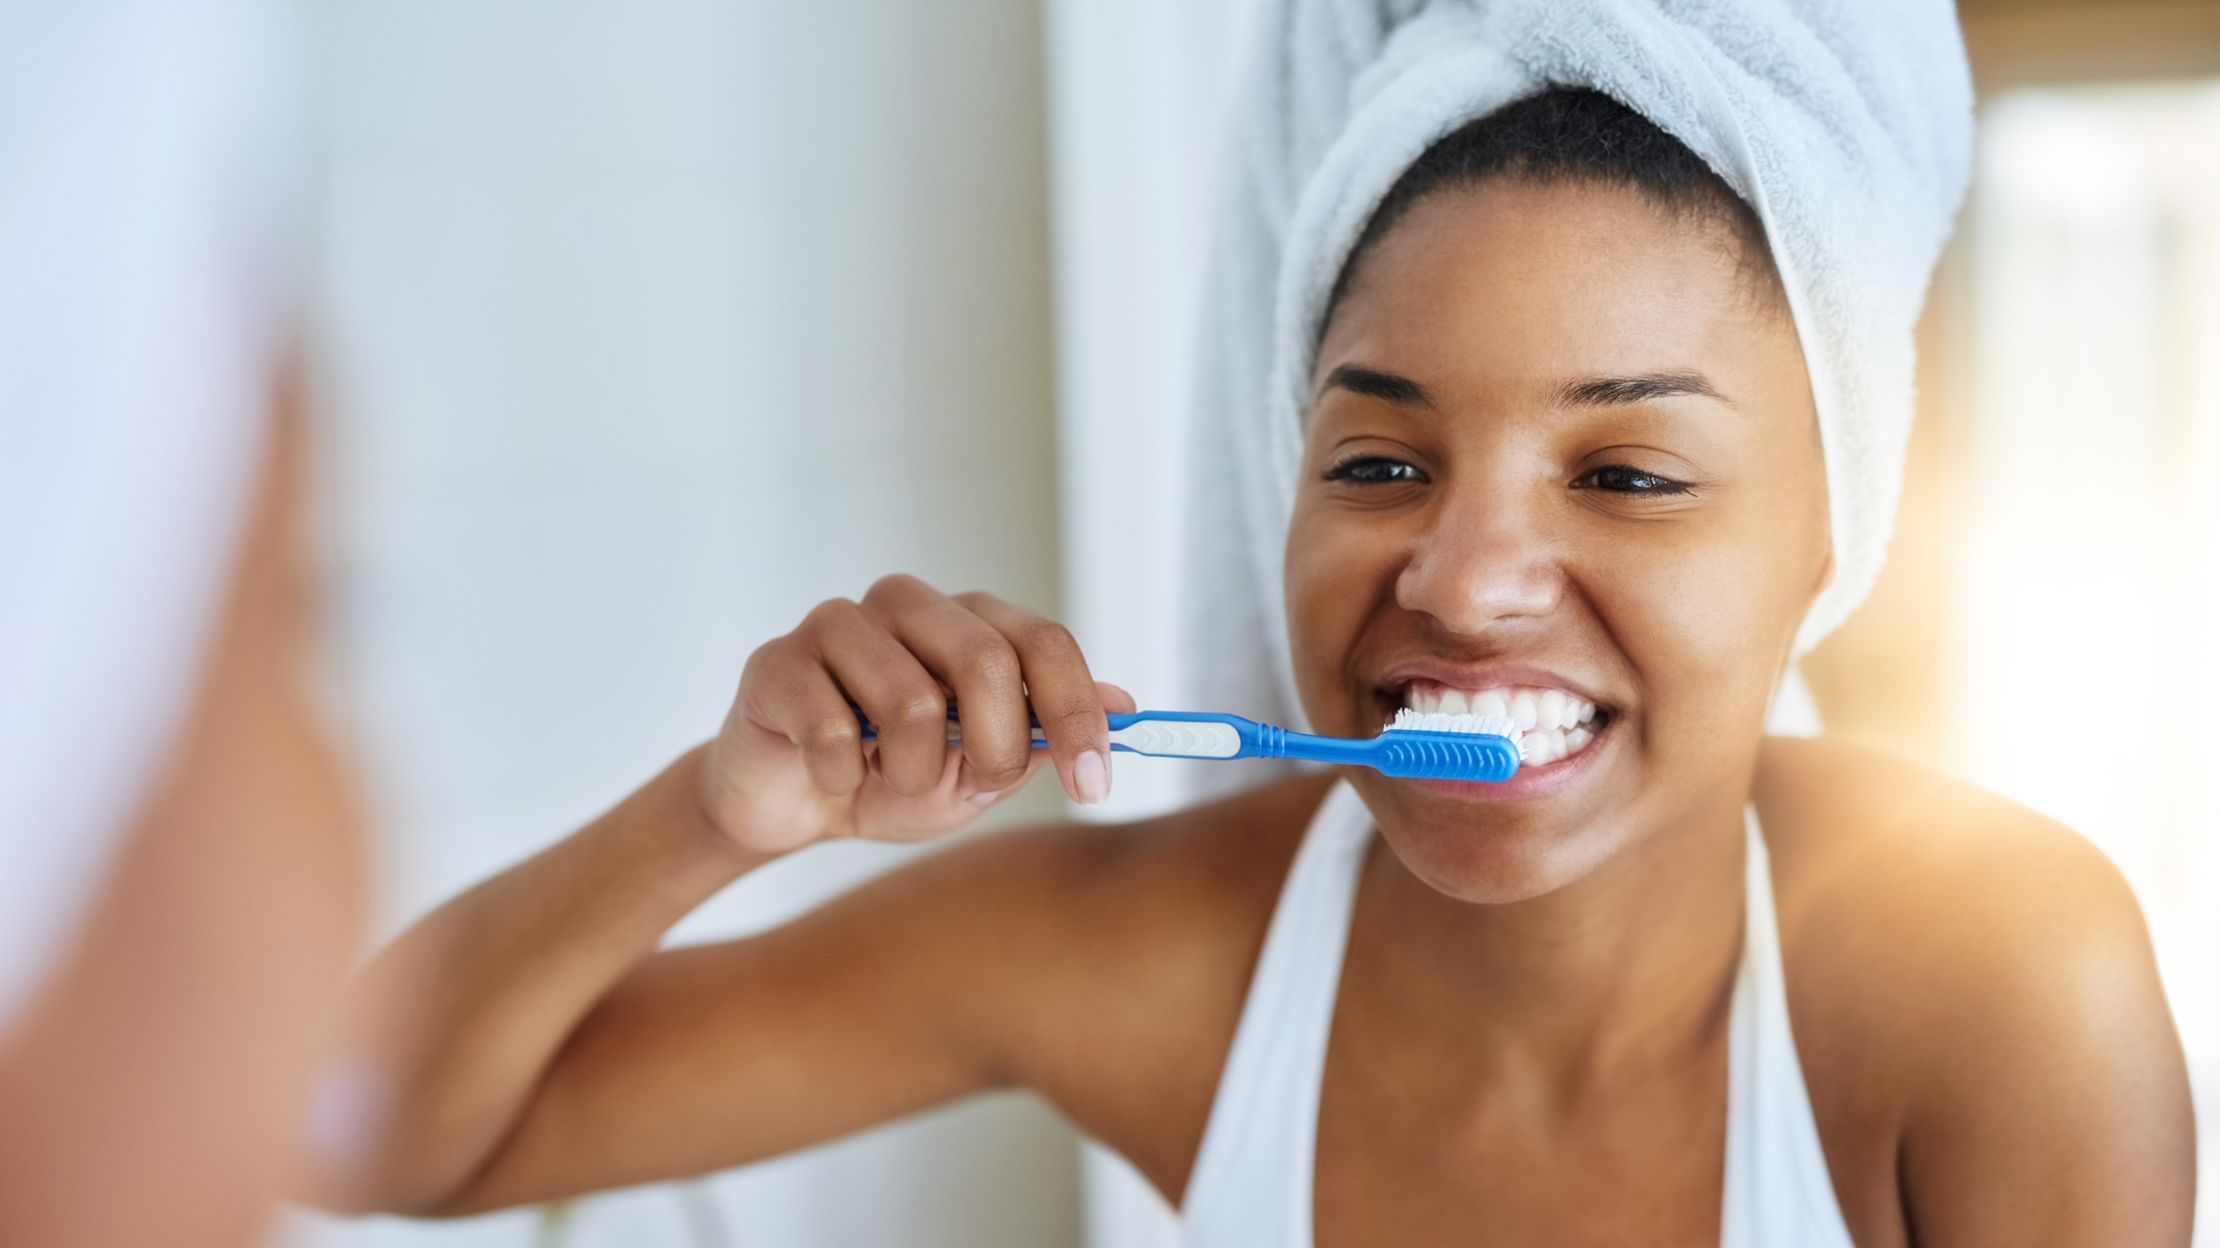 Fake Nerds Can Only Score 6/15 on This Quiz, But Real Nerds Can Score 12/15 Brush your teeth